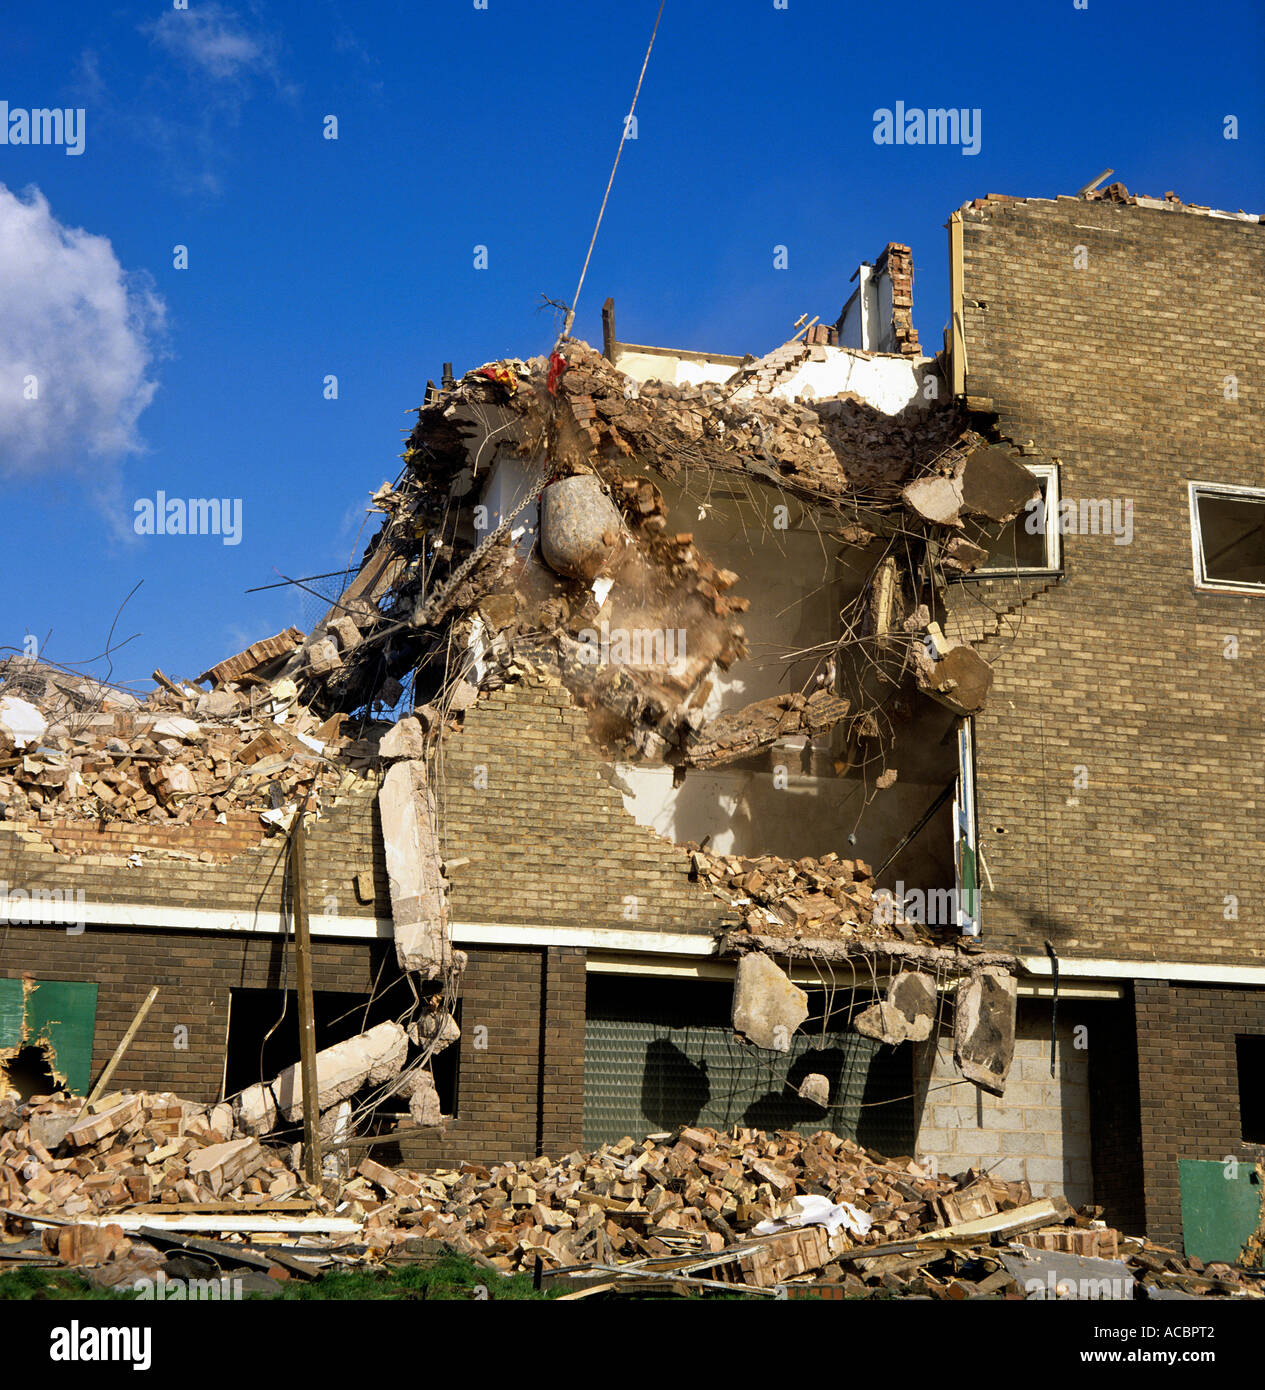 demolition of building by wrecking ball Stock Photo